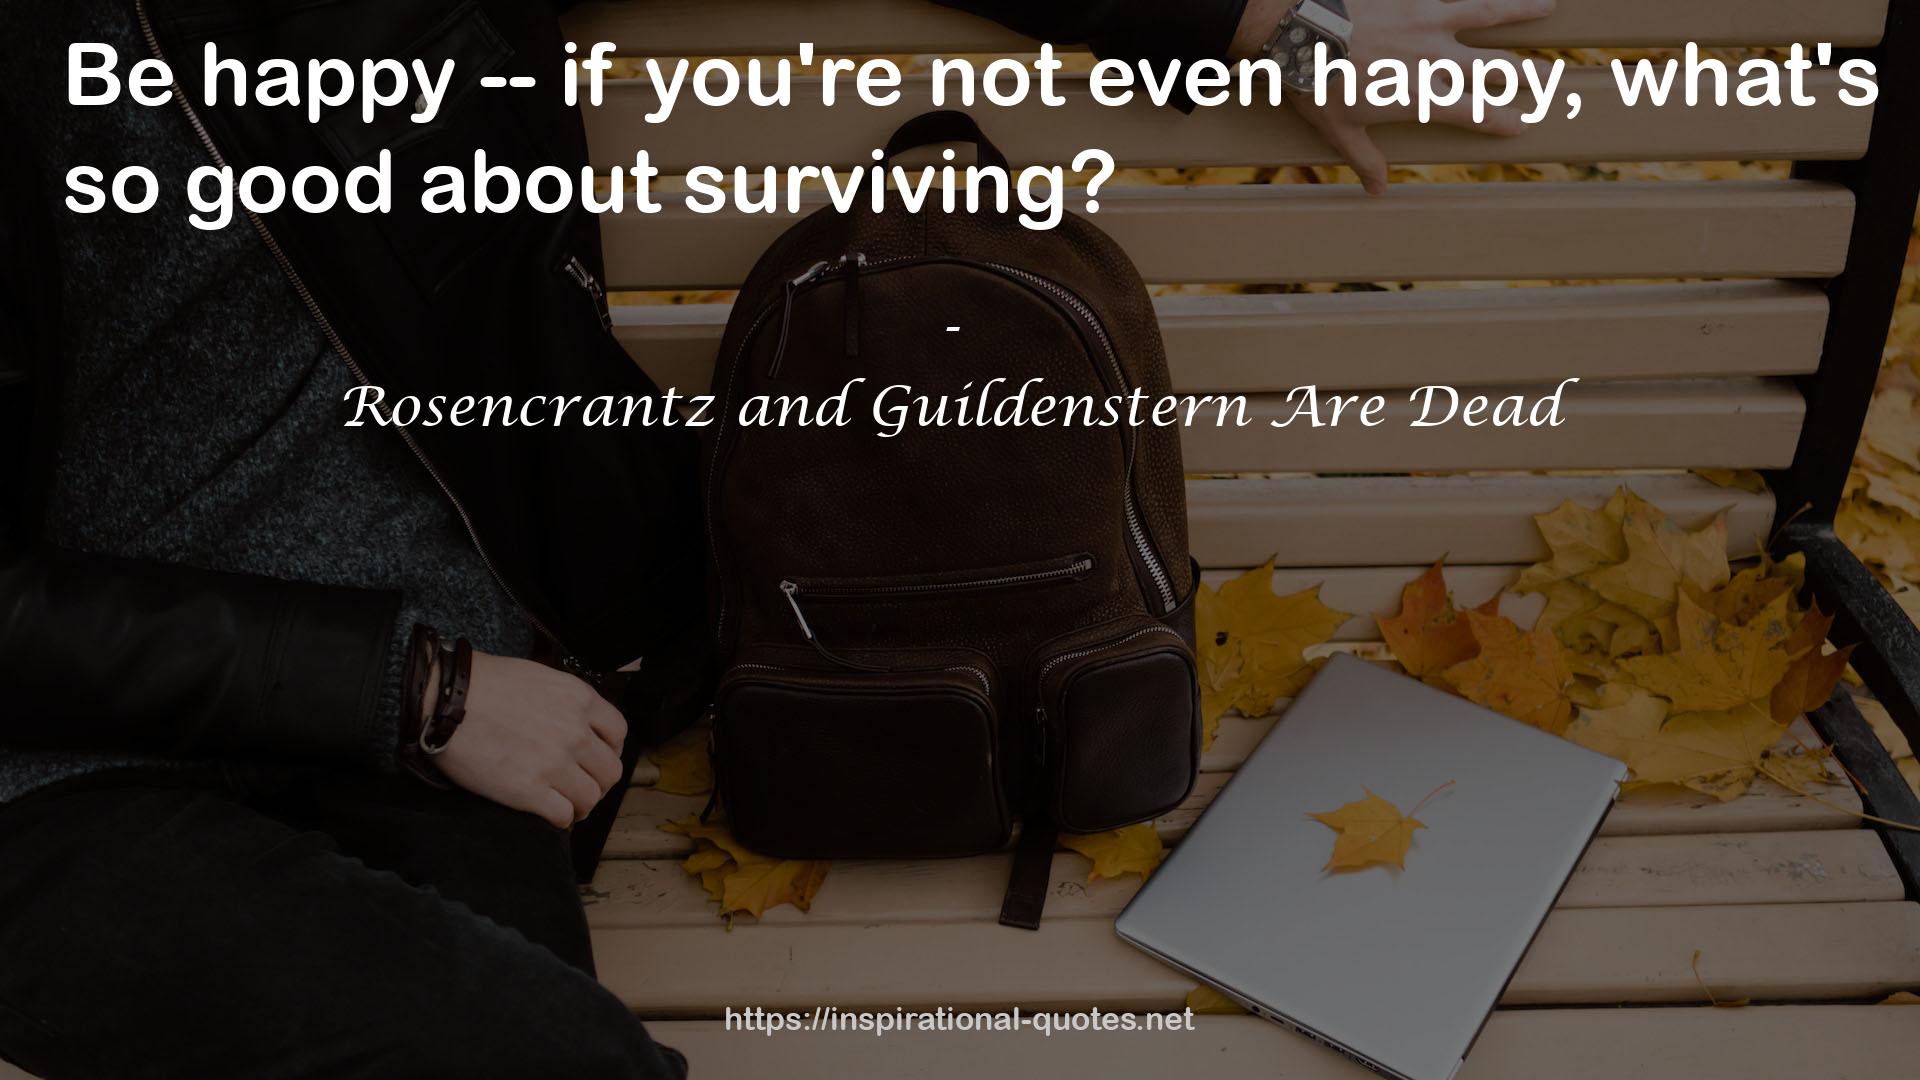 Rosencrantz and Guildenstern Are Dead QUOTES